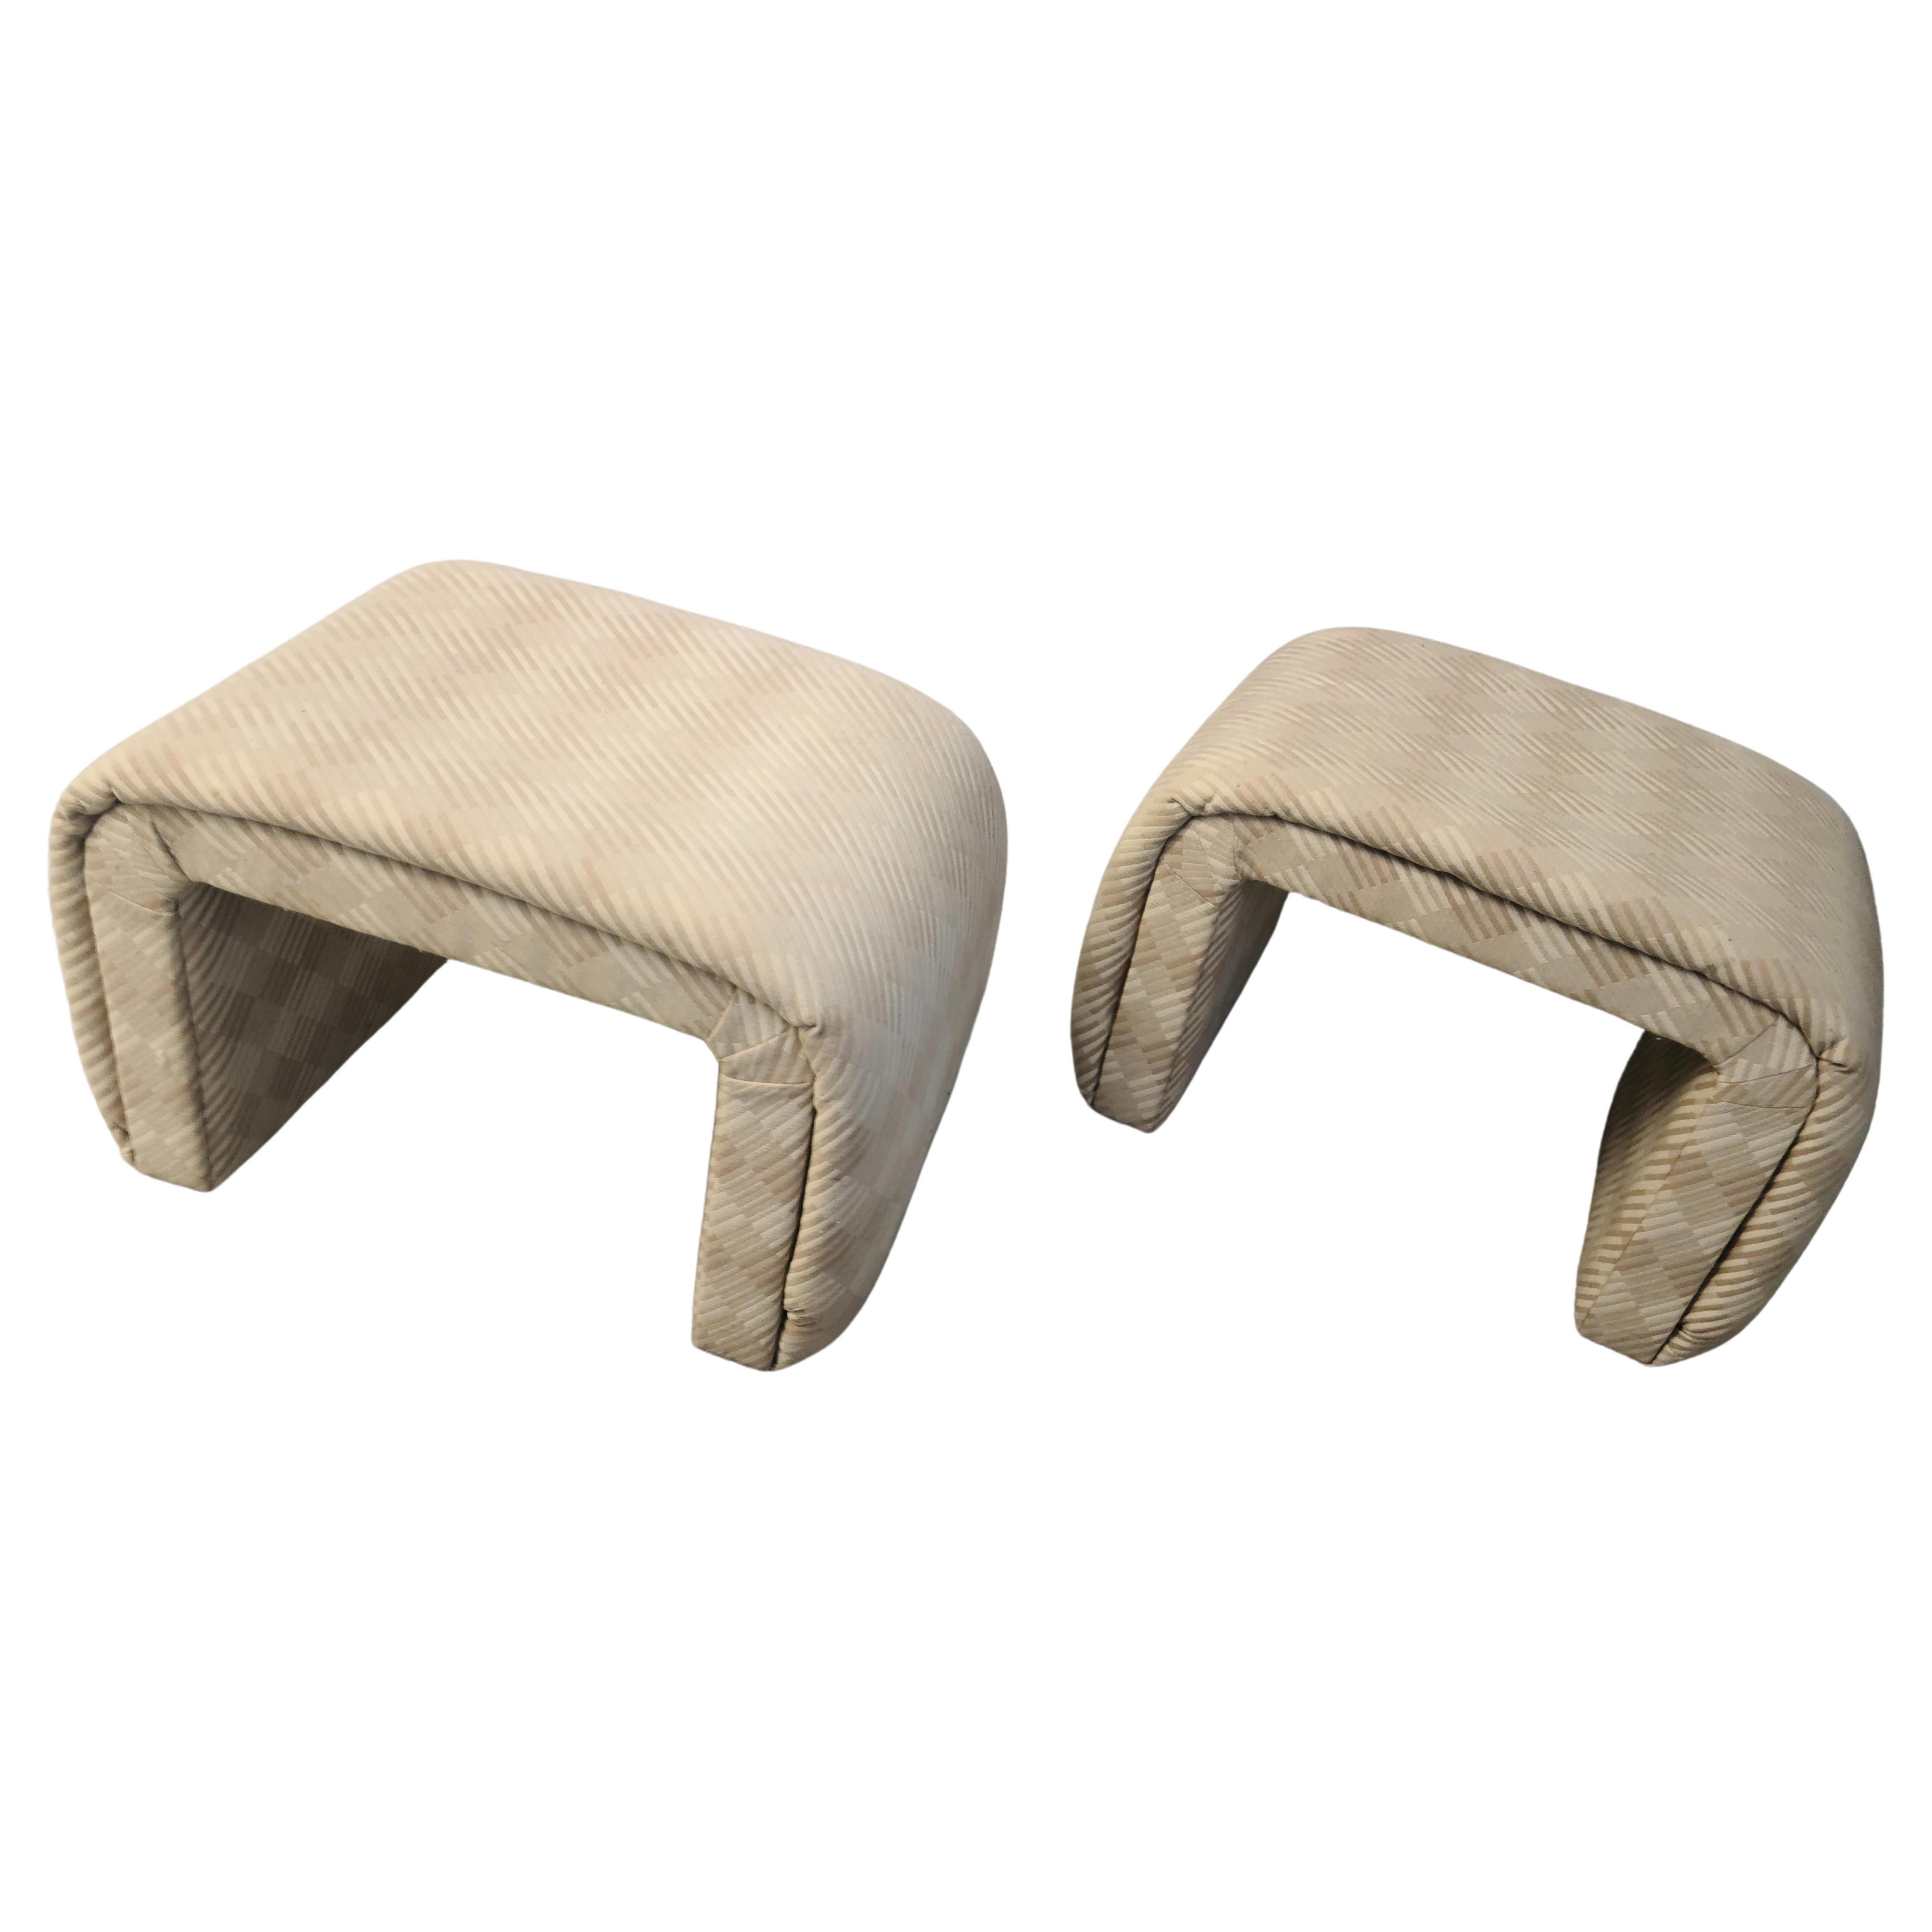 Pair Staple Ottoman Footstools in the style of Kagan In Good Condition For Sale In Fraser, MI